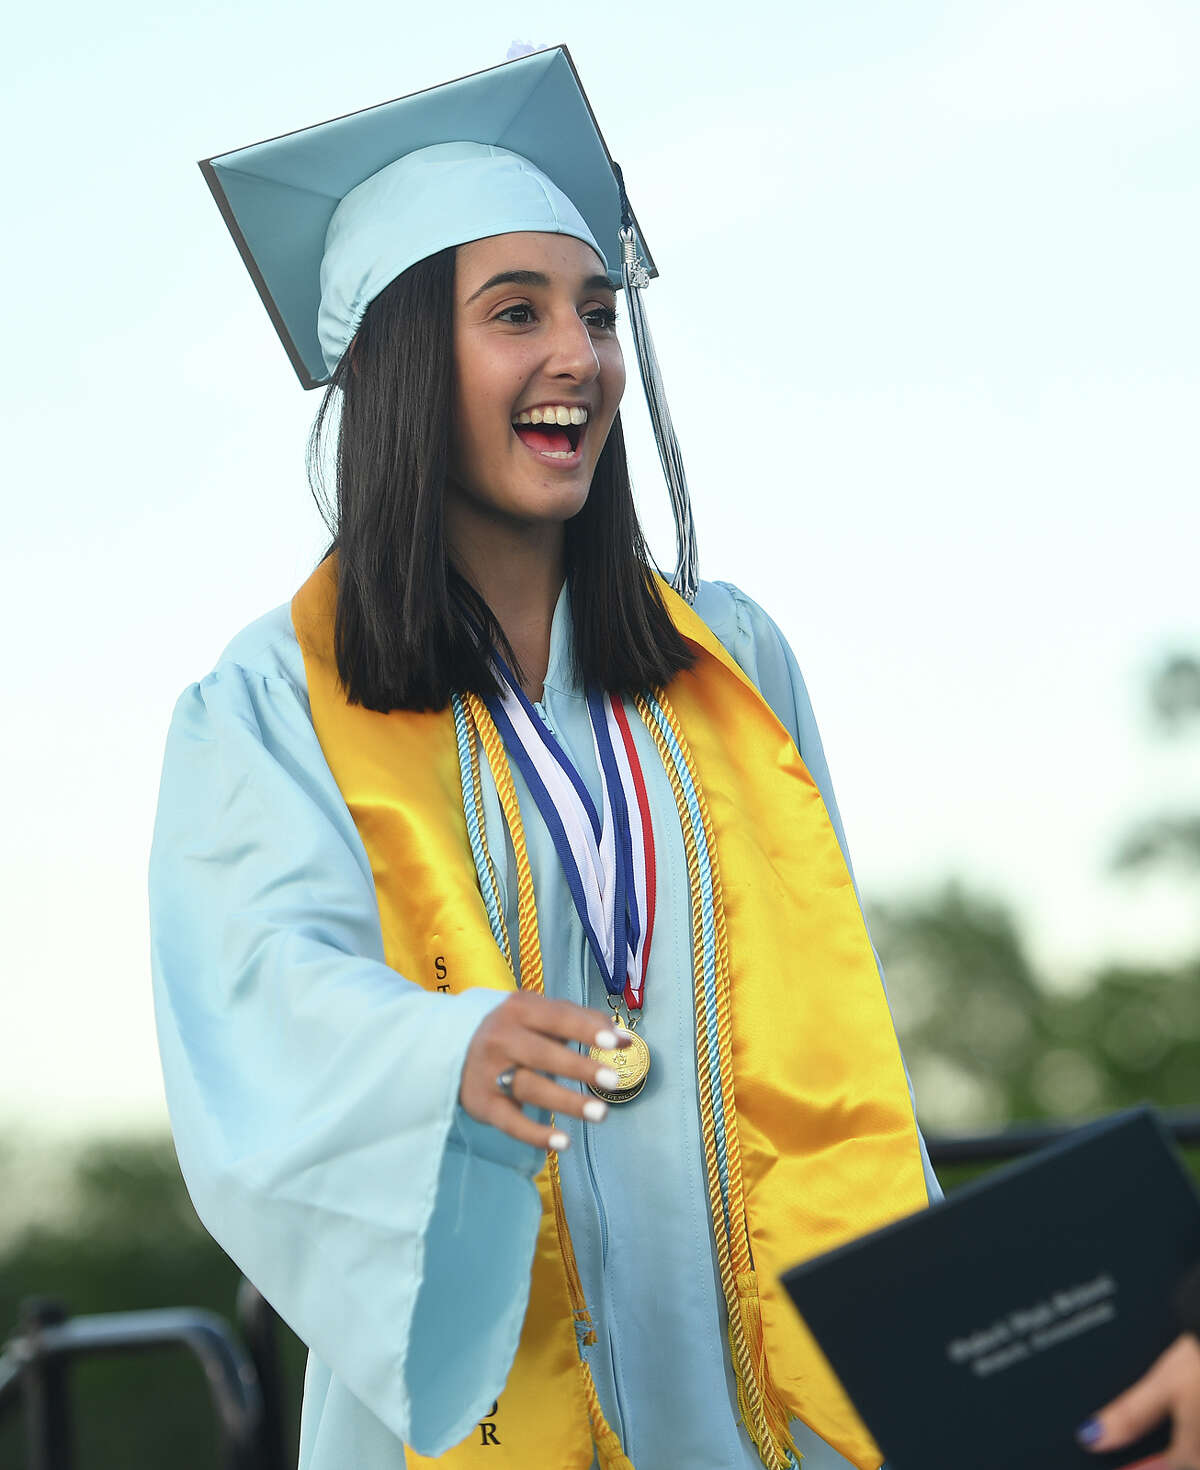 The Oxford High School Graduation in Oxford, Conn. on Tuesday, June 11, 2019.